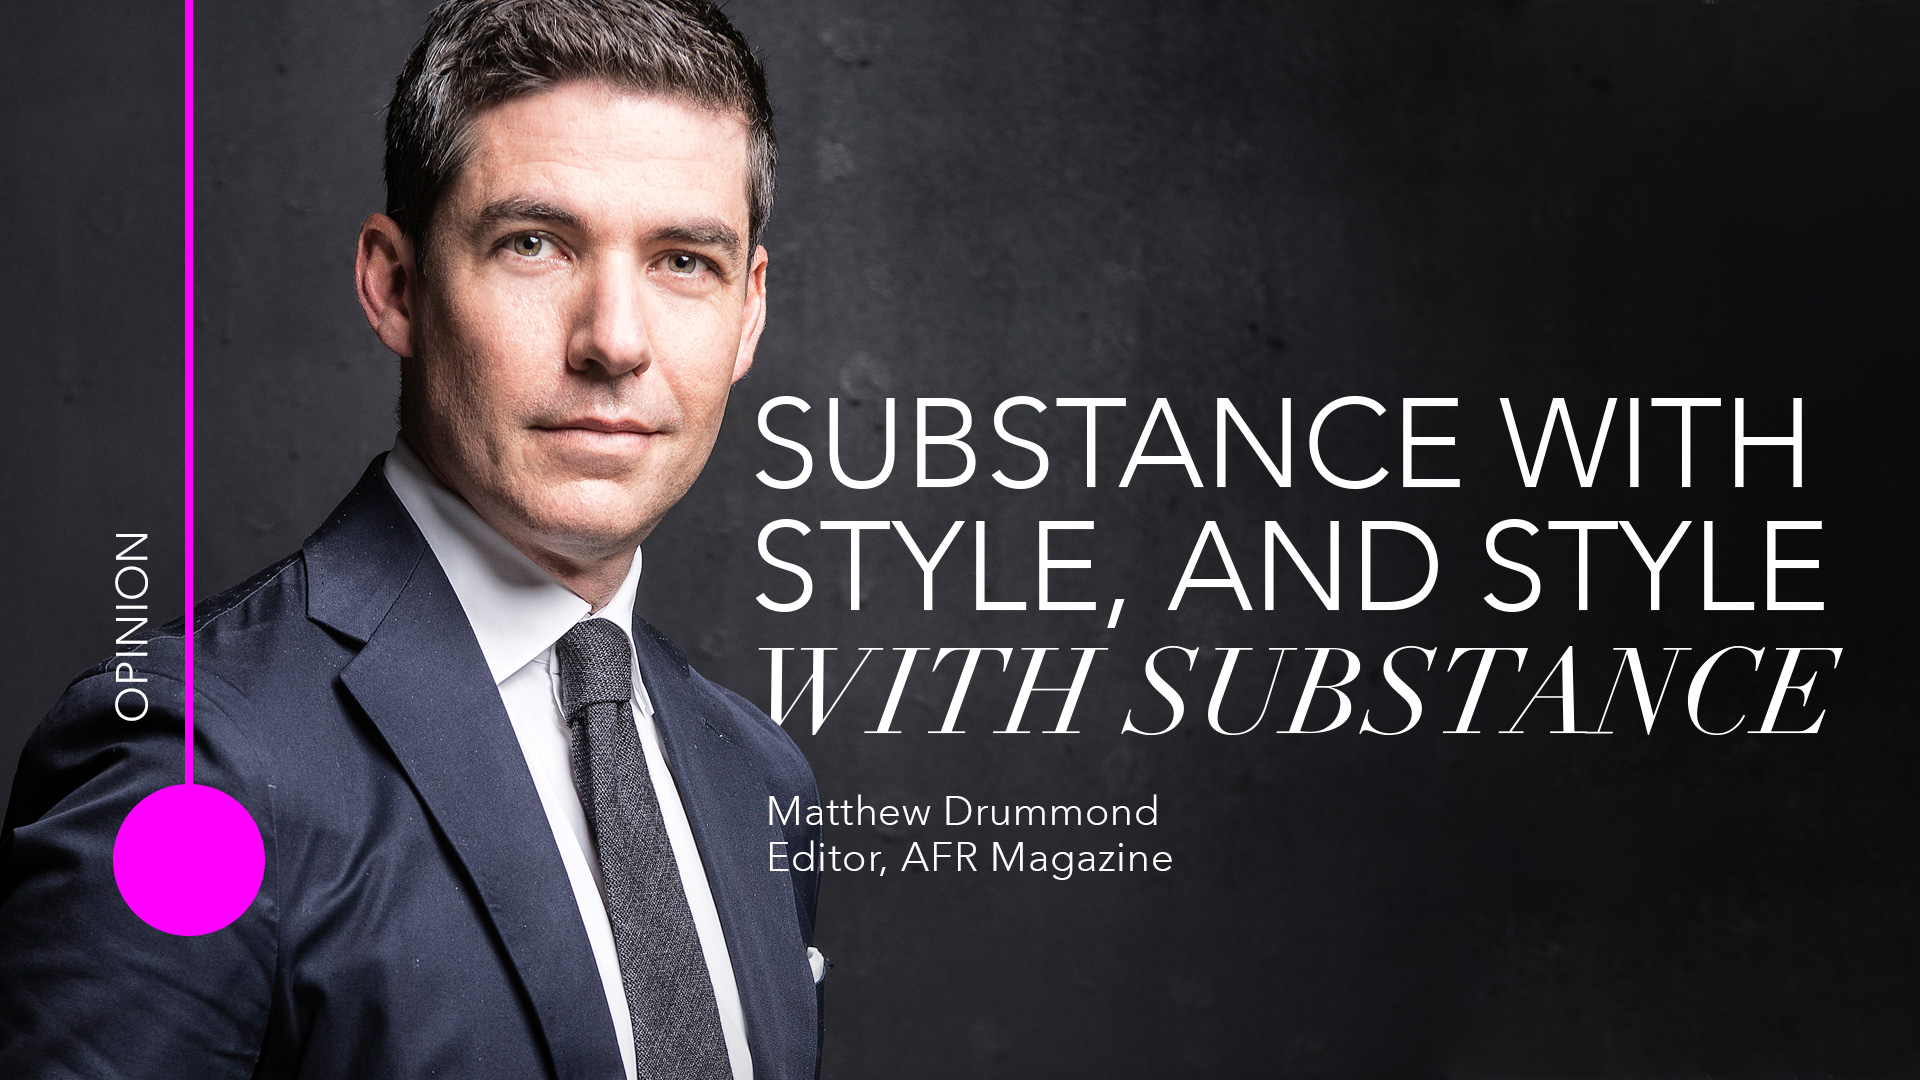 The substance of style